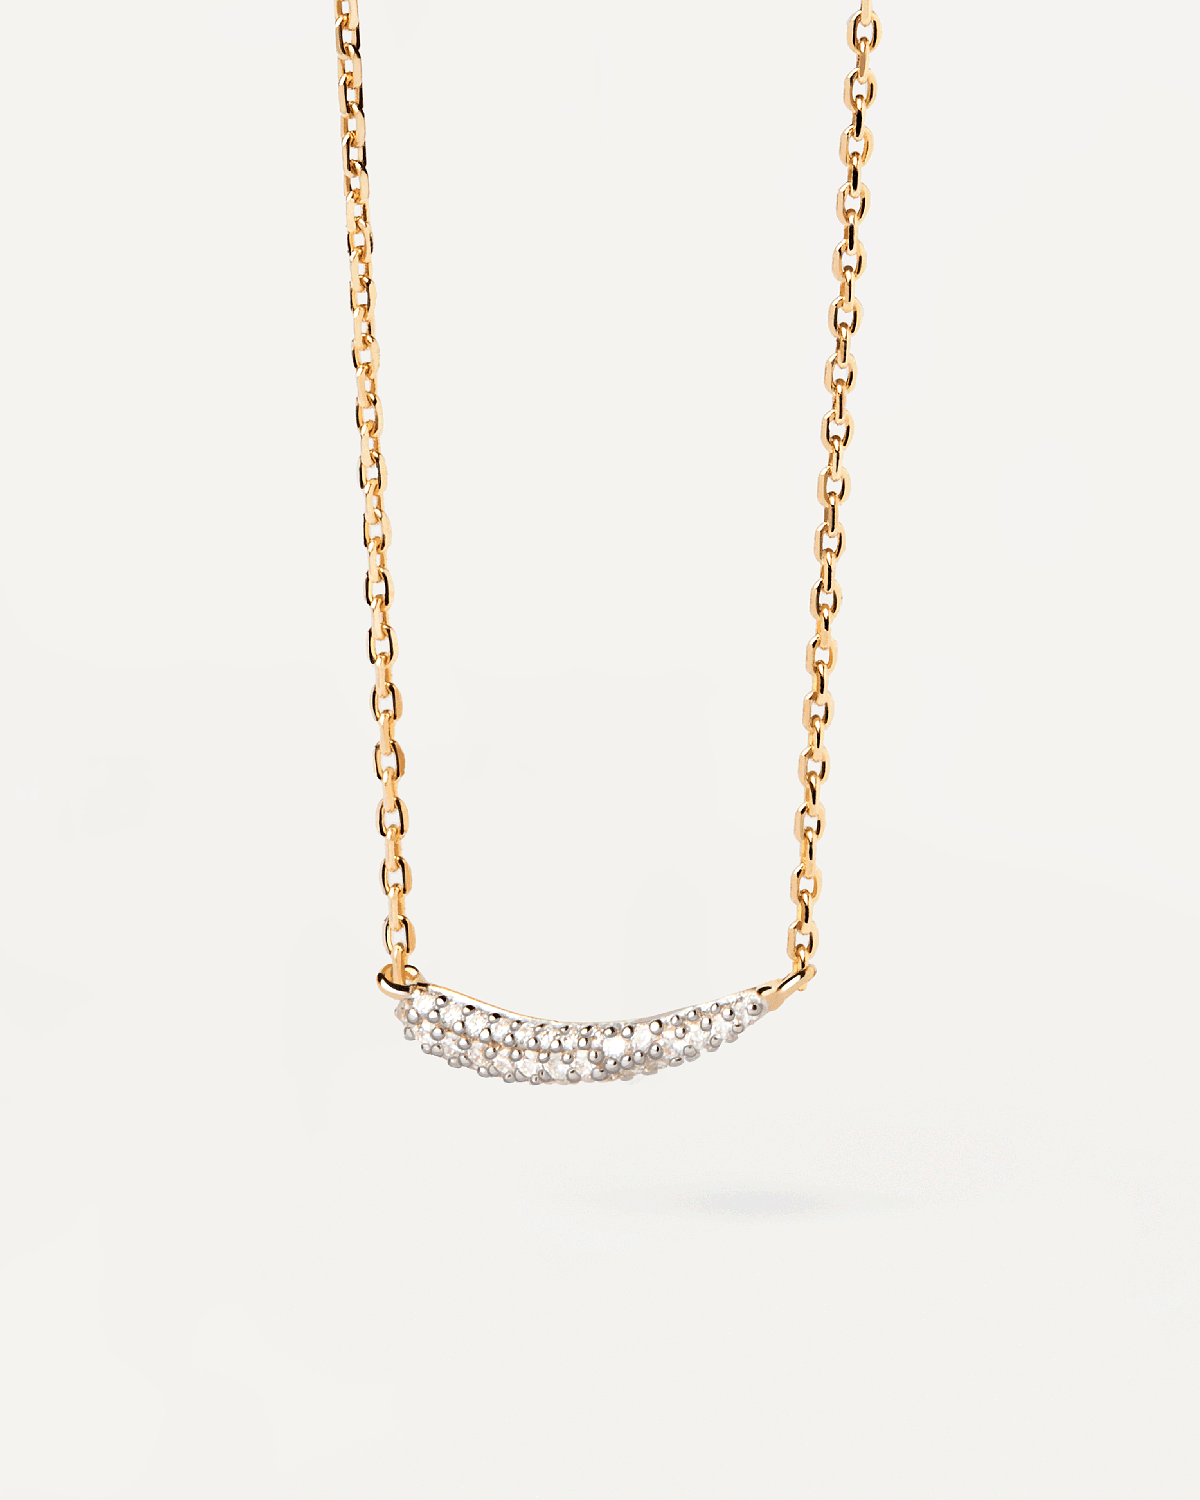 Diamonds and gold Nilo necklace. Solid yellow gold necklace with a pointed curve pavé lab-grown diamond of 0.13 carats. Get the latest arrival from PDPAOLA. Place your order safely and get this Best Seller.